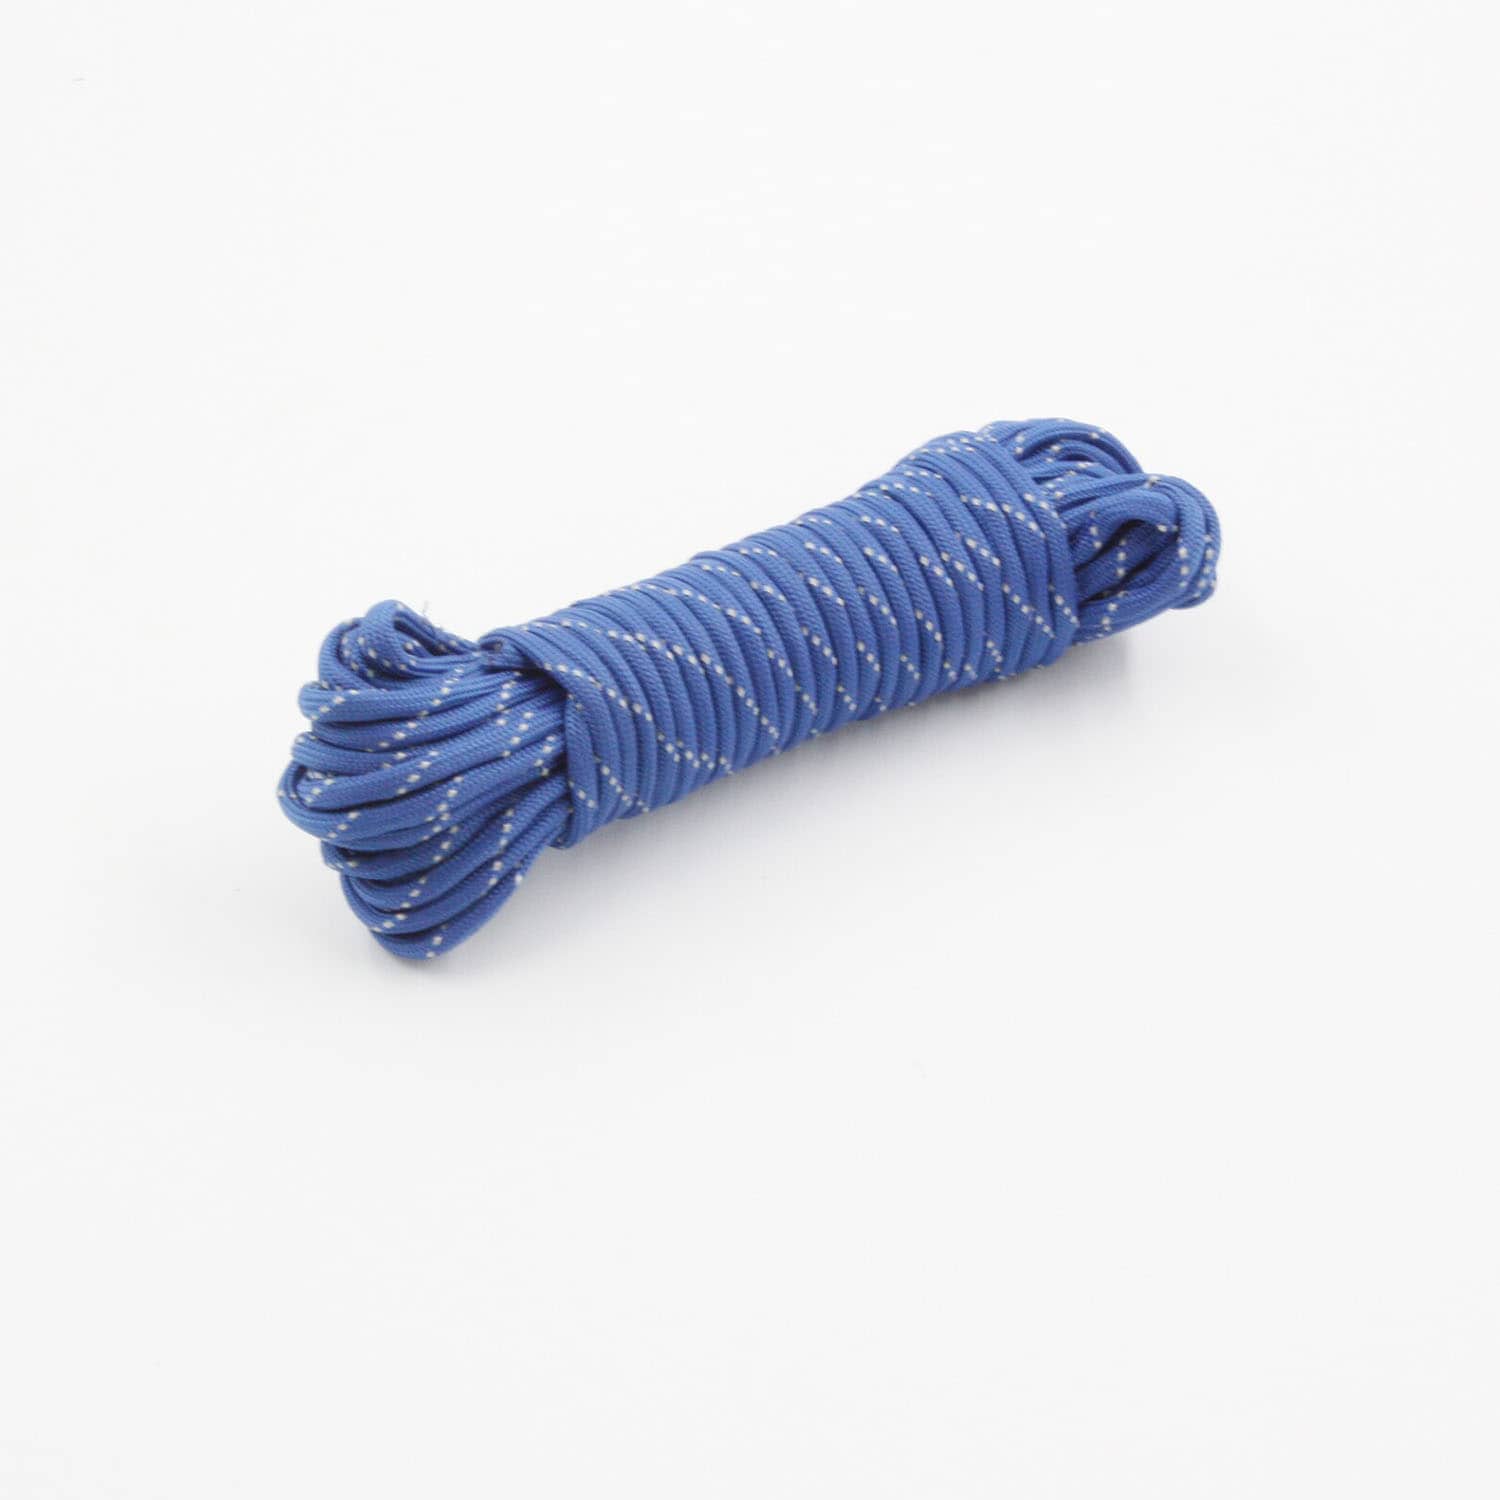 Blue Hawk 0.1563-in x 50-ft Braided Nylon Rope (By-the-Roll) in